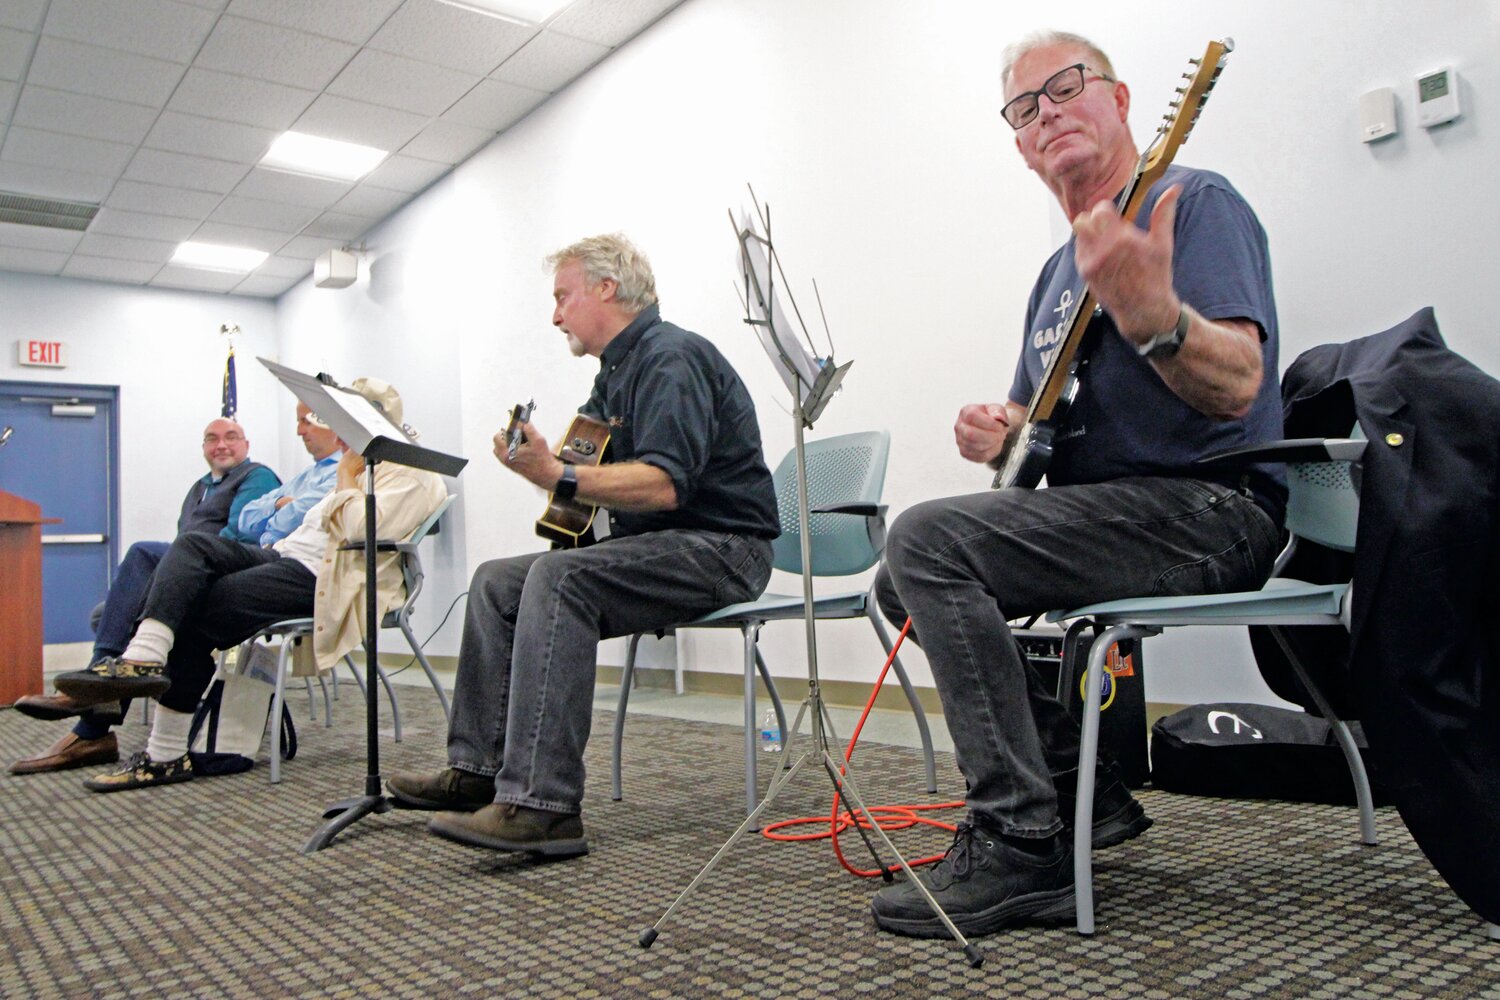 ROCKING THE GASPEE: John Foley and Rep. Joe McNamara on guitar teamed up to play McNamara’s composition during the opening of the Gaspee display at the Warwick Library on Saturday. (Warwick Beacon photos)